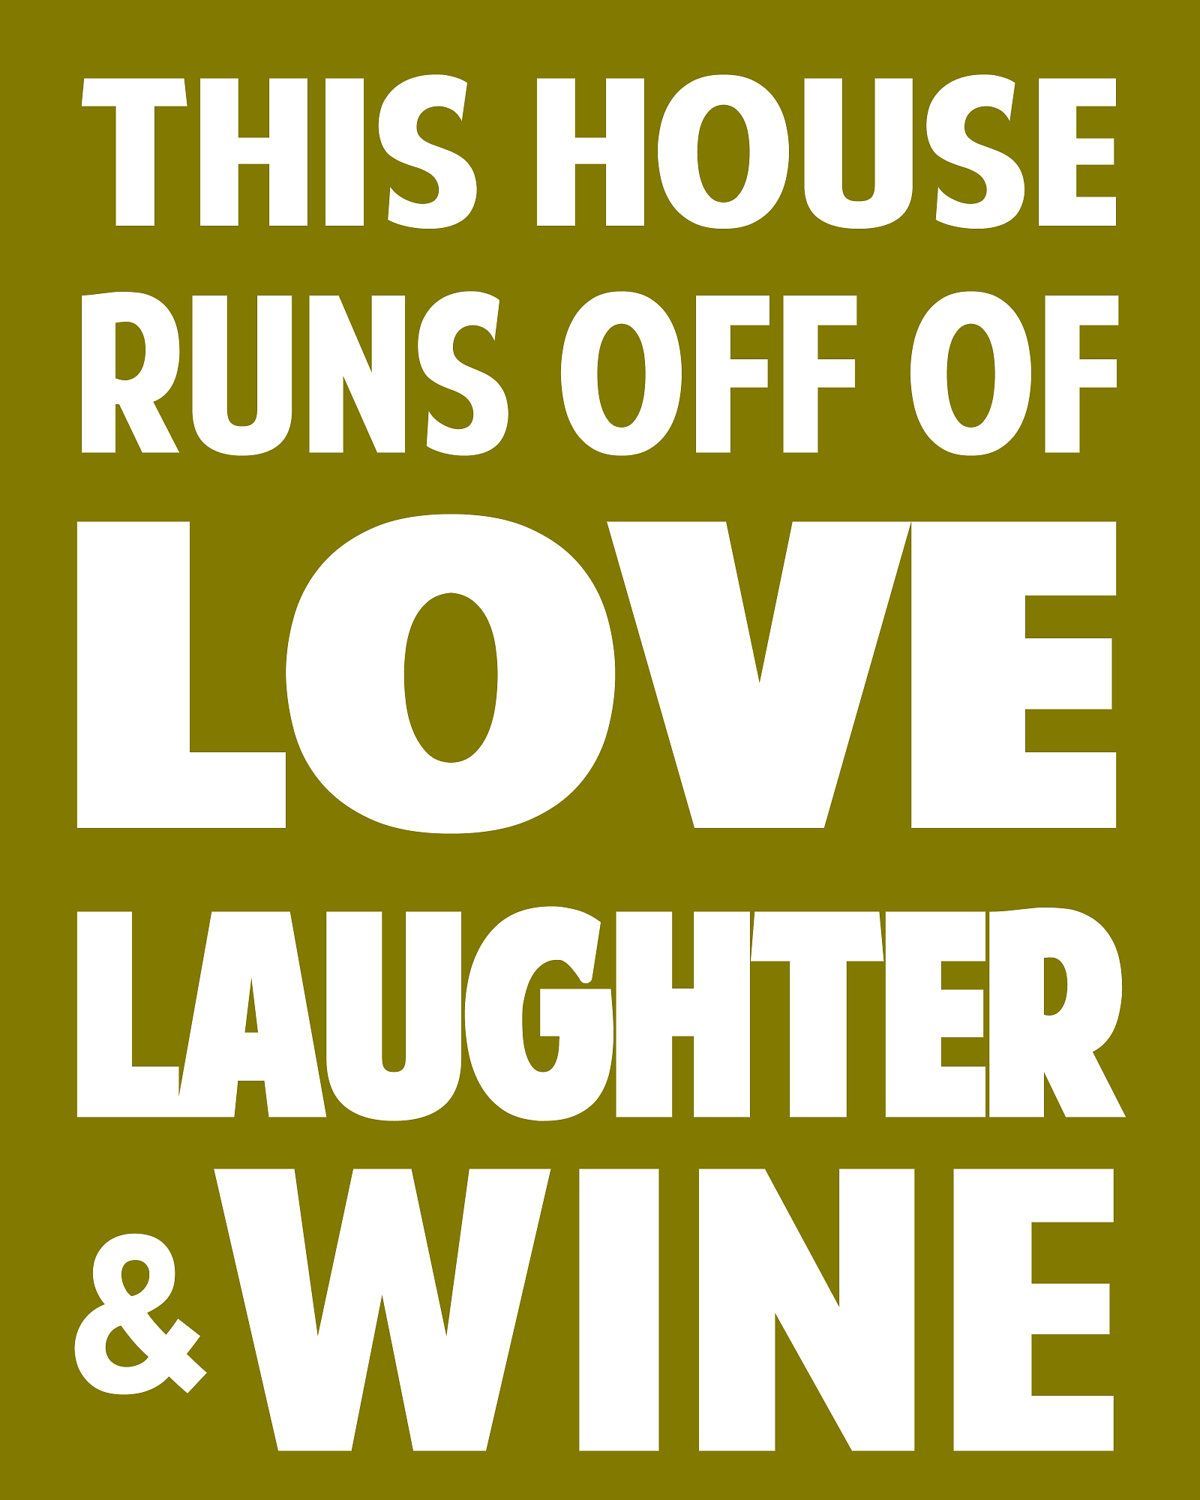 Love, laughter and wine – three VERY important ingredients for a happy home!